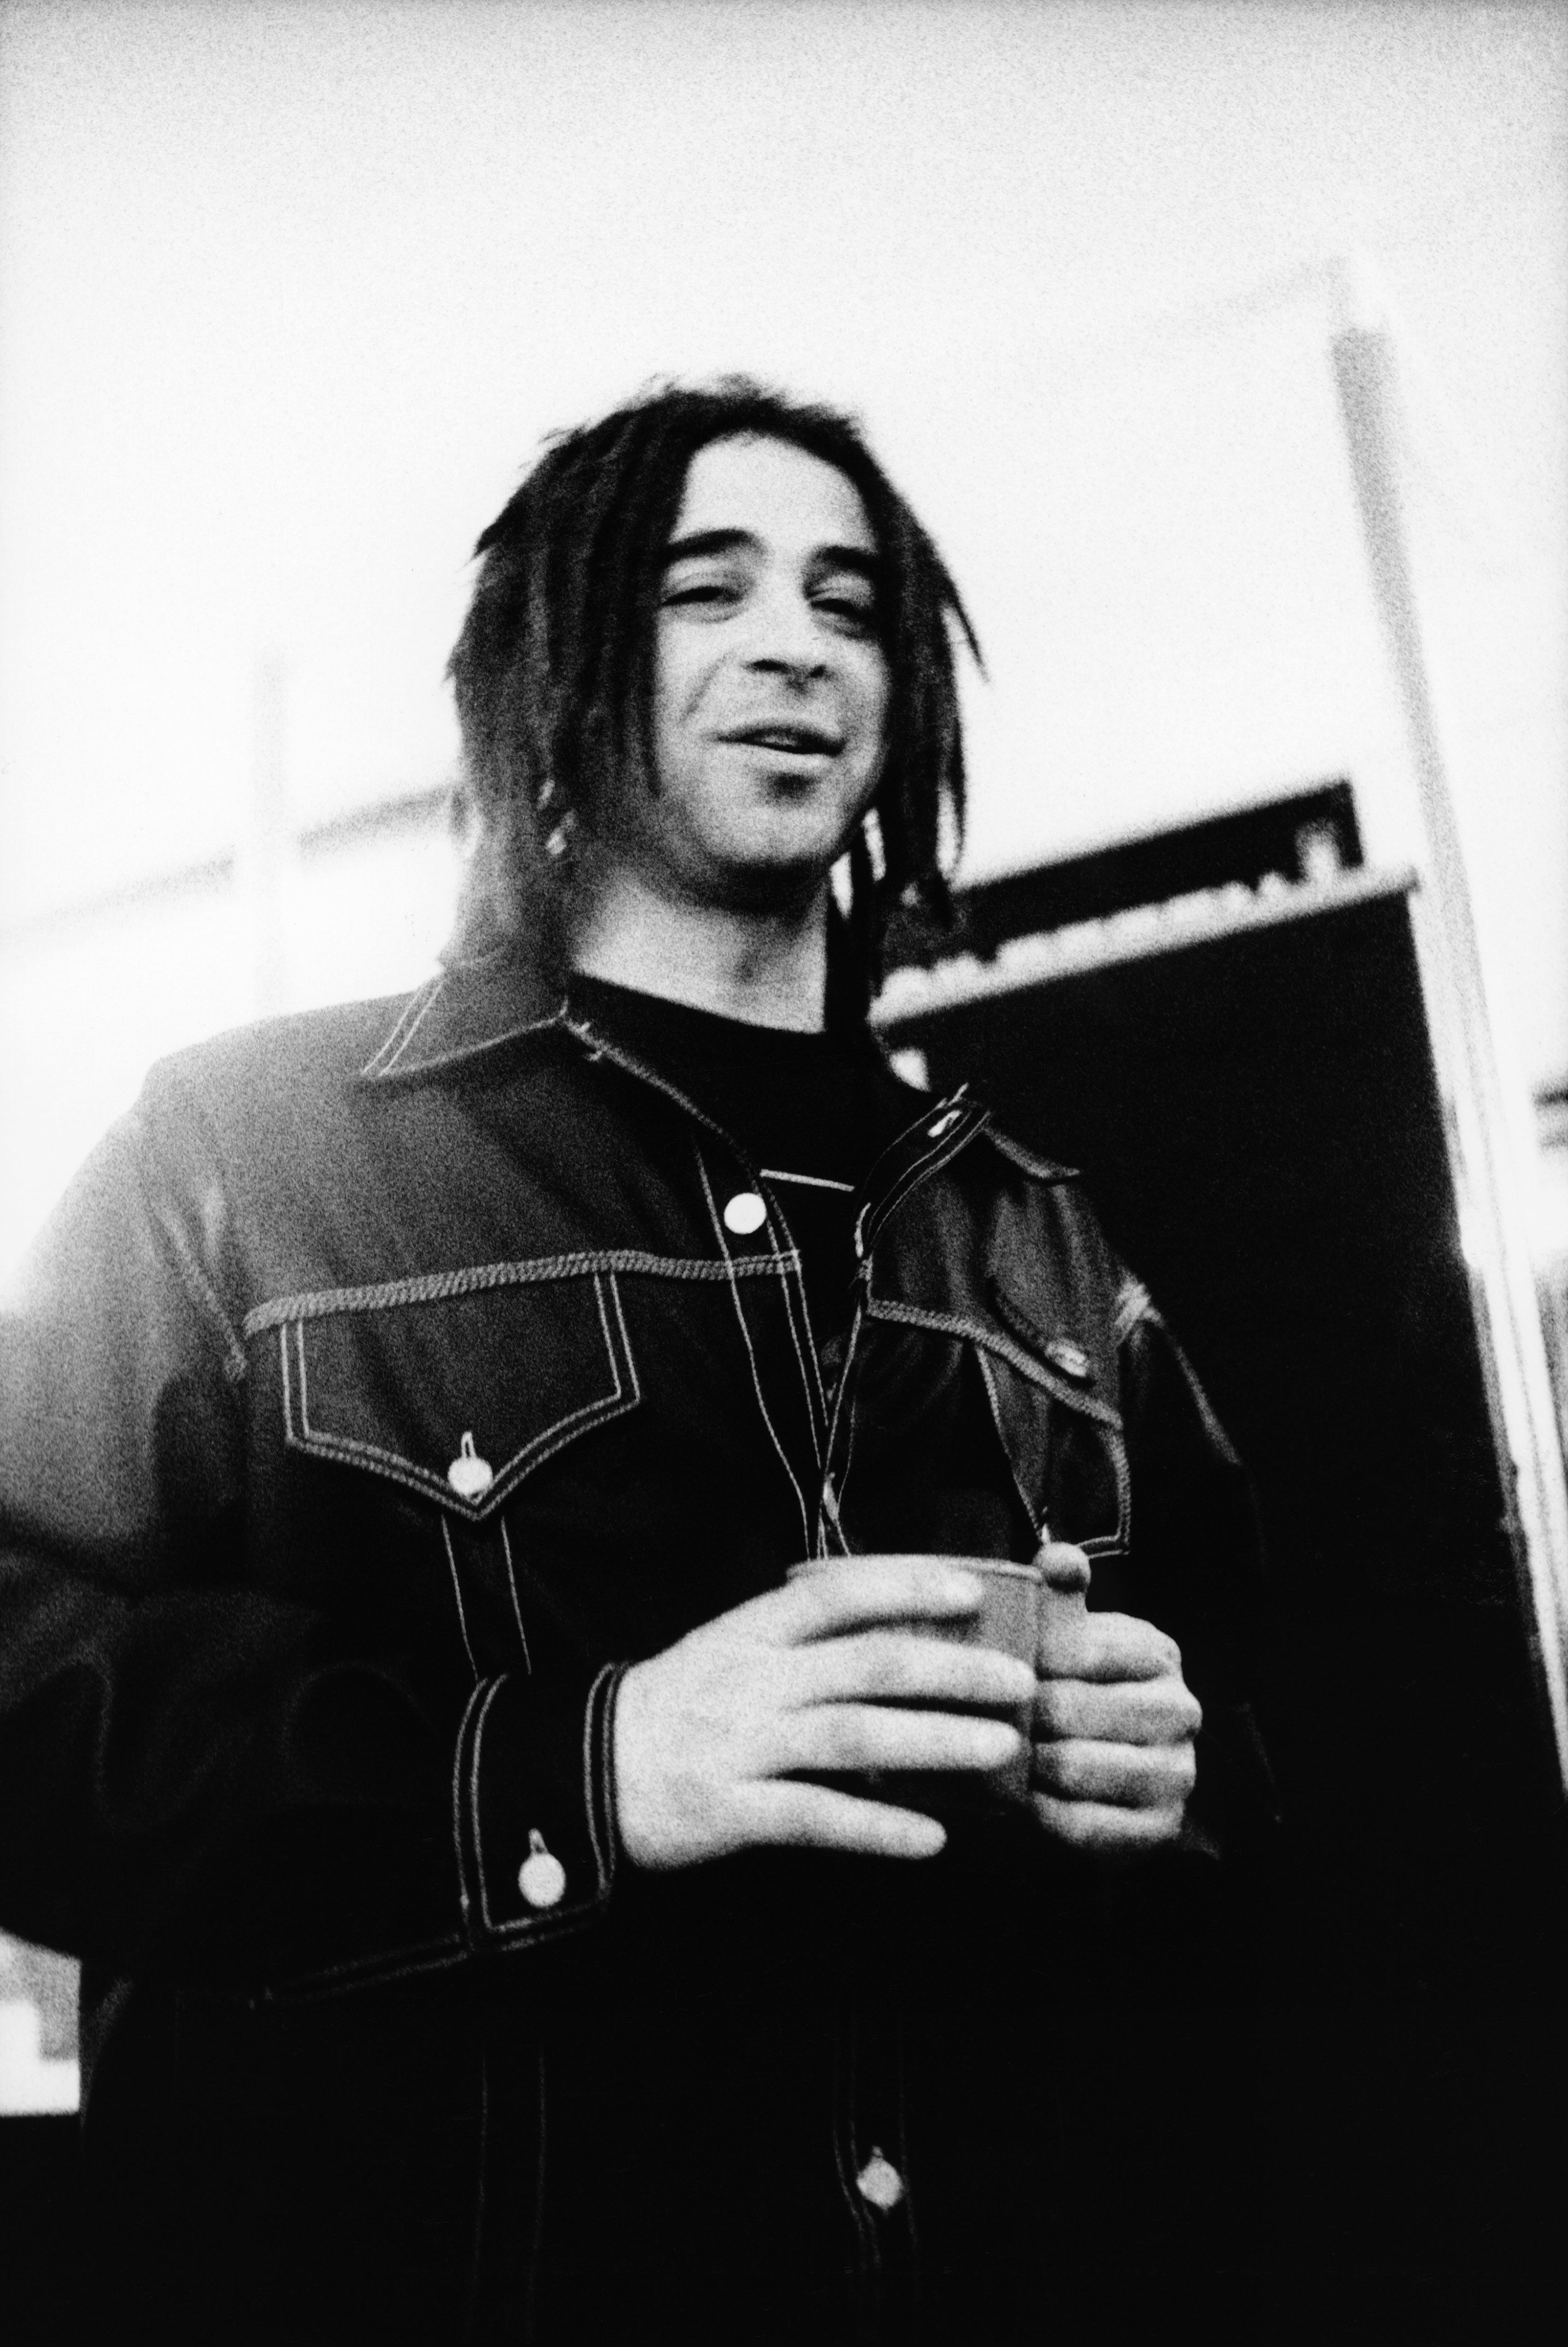 Adam Duritz singer with American band Counting Crows backstage in the Netherlands in 1994